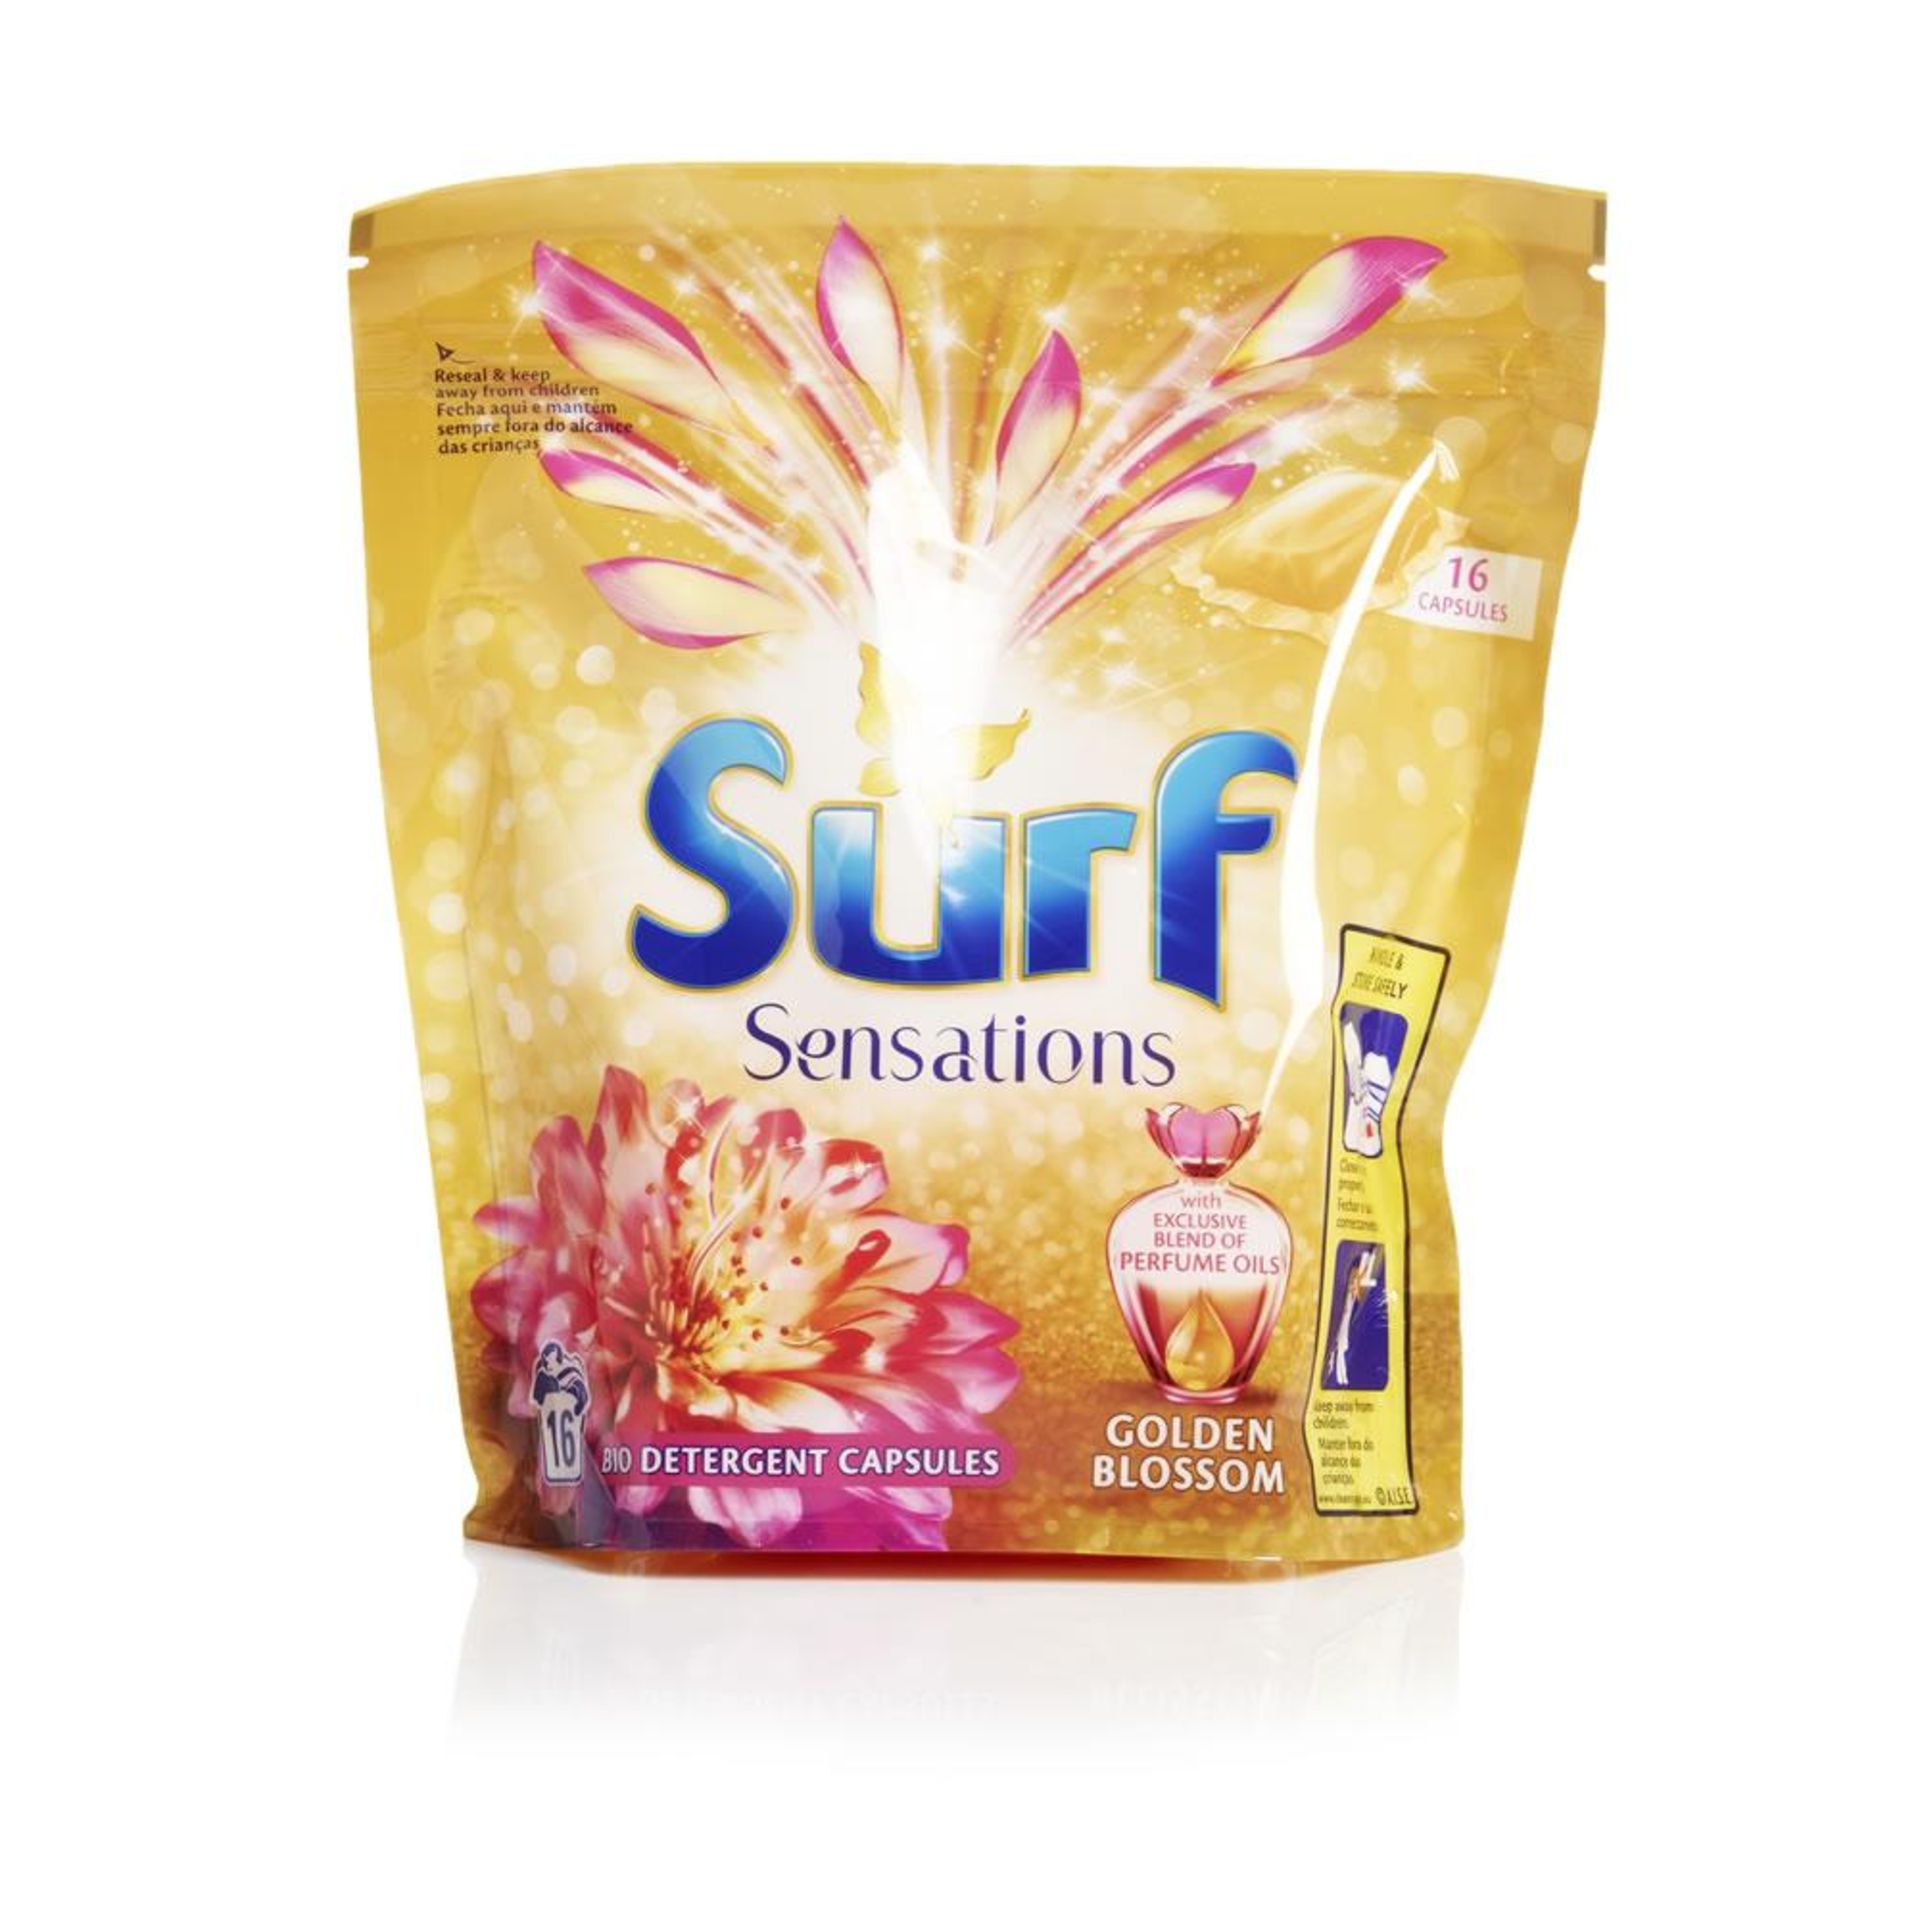 V *TRADE QTY* Brand New Surf Sensations Golden Blossom 18 Wash Capsules X 90 YOUR BID PRICE TO BE